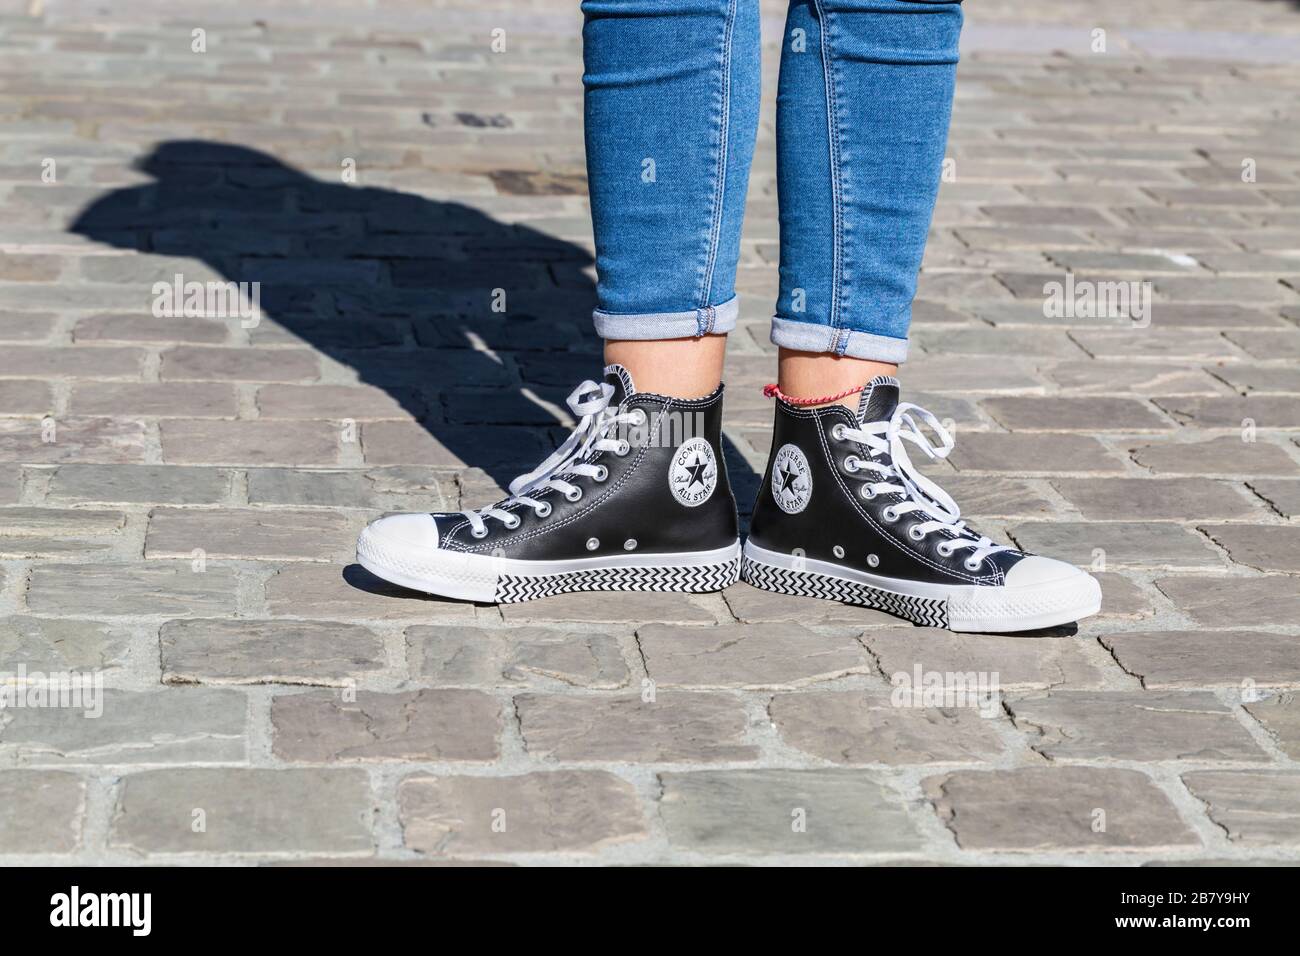 Chartres, France - Spetember 2, 2019: Image of the lower part of teenager's  legs in jeans and All Star Converse sneakers in a cobblestone street Stock  Photo - Alamy